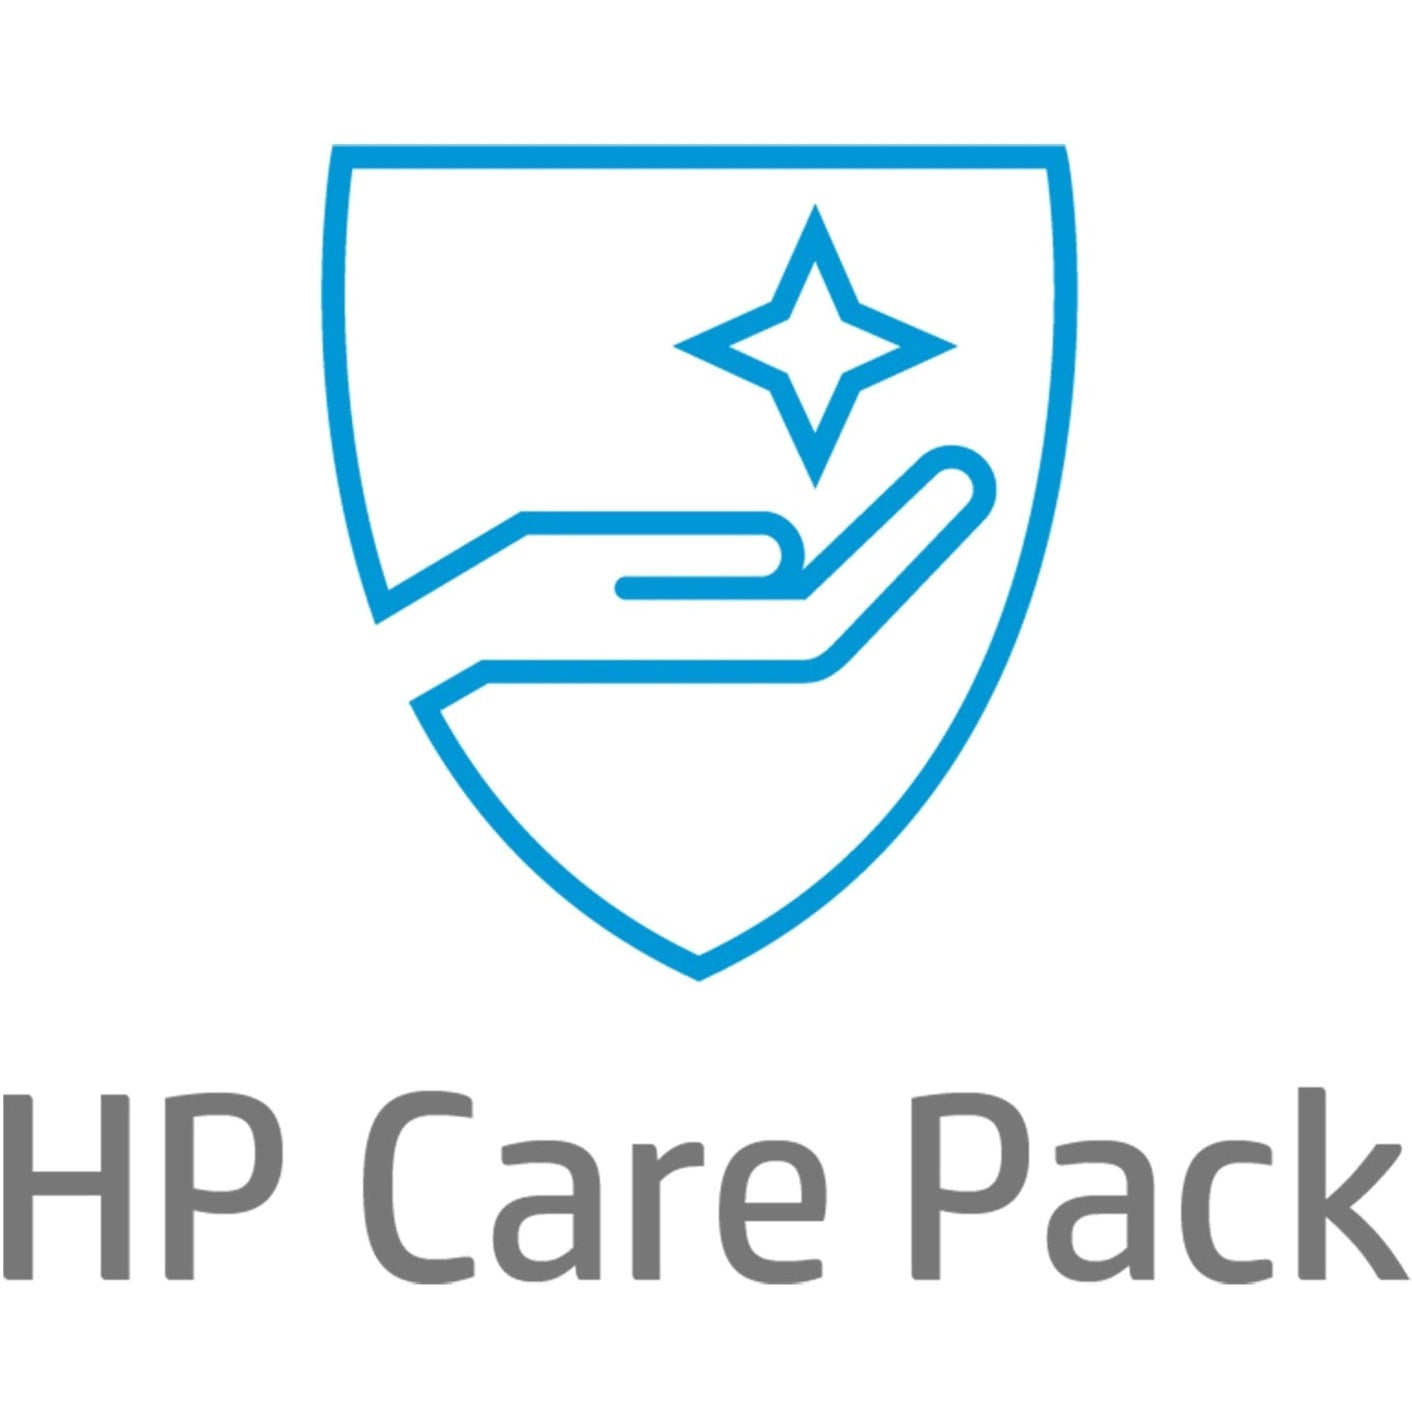 HP Care Pack Hardware Support with Accidental Damage Protection G2 - Extended Service - 3 Year - Service (U9DQ0E)